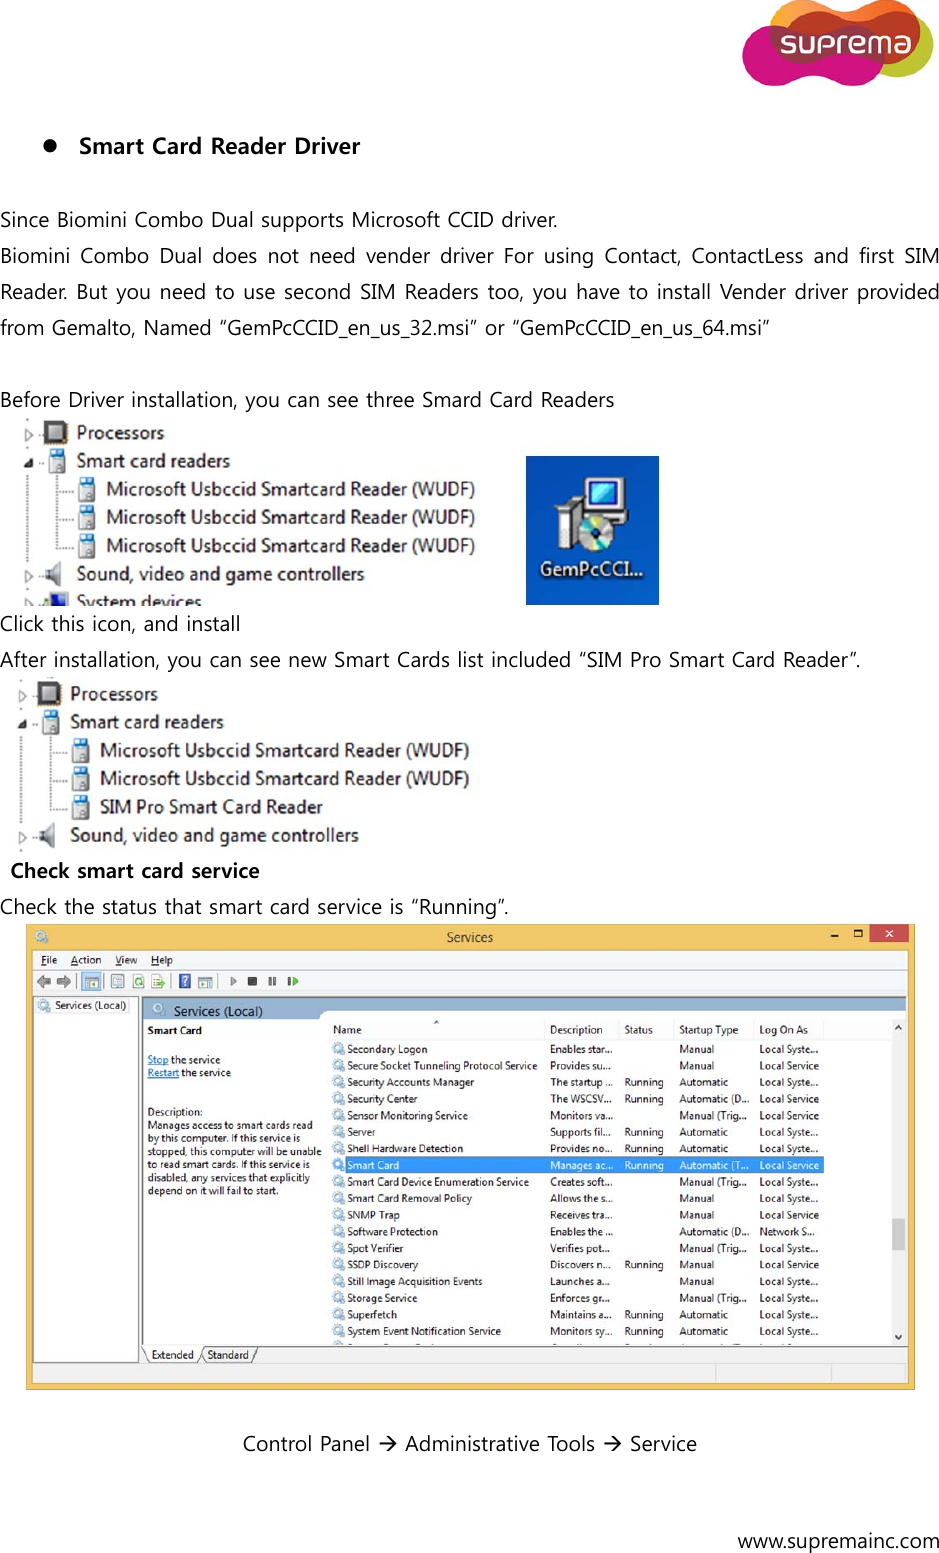  www.supremainc.com   Smart Card Reader Driver    Since Biomini Combo Dual supports Microsoft CCID driver. Biomini Combo  Dual does  not need  vender driver For  using Contact, ContactLess  and  first  SIM Reader. But you need to use second SIM Readers too, you have to install Vender driver provided from Gemalto, Named “GemPcCCID_en_us_32.msi” or “GemPcCCID_en_us_64.msi”  Before Driver installation, you can see three Smard Card Readers    Click this icon, and install After installation, you can see new Smart Cards list included “SIM Pro Smart Card Reader”.    Check smart card service   Check the status that smart card service is “Running”.    Control Panel  Administrative Tools  Service     